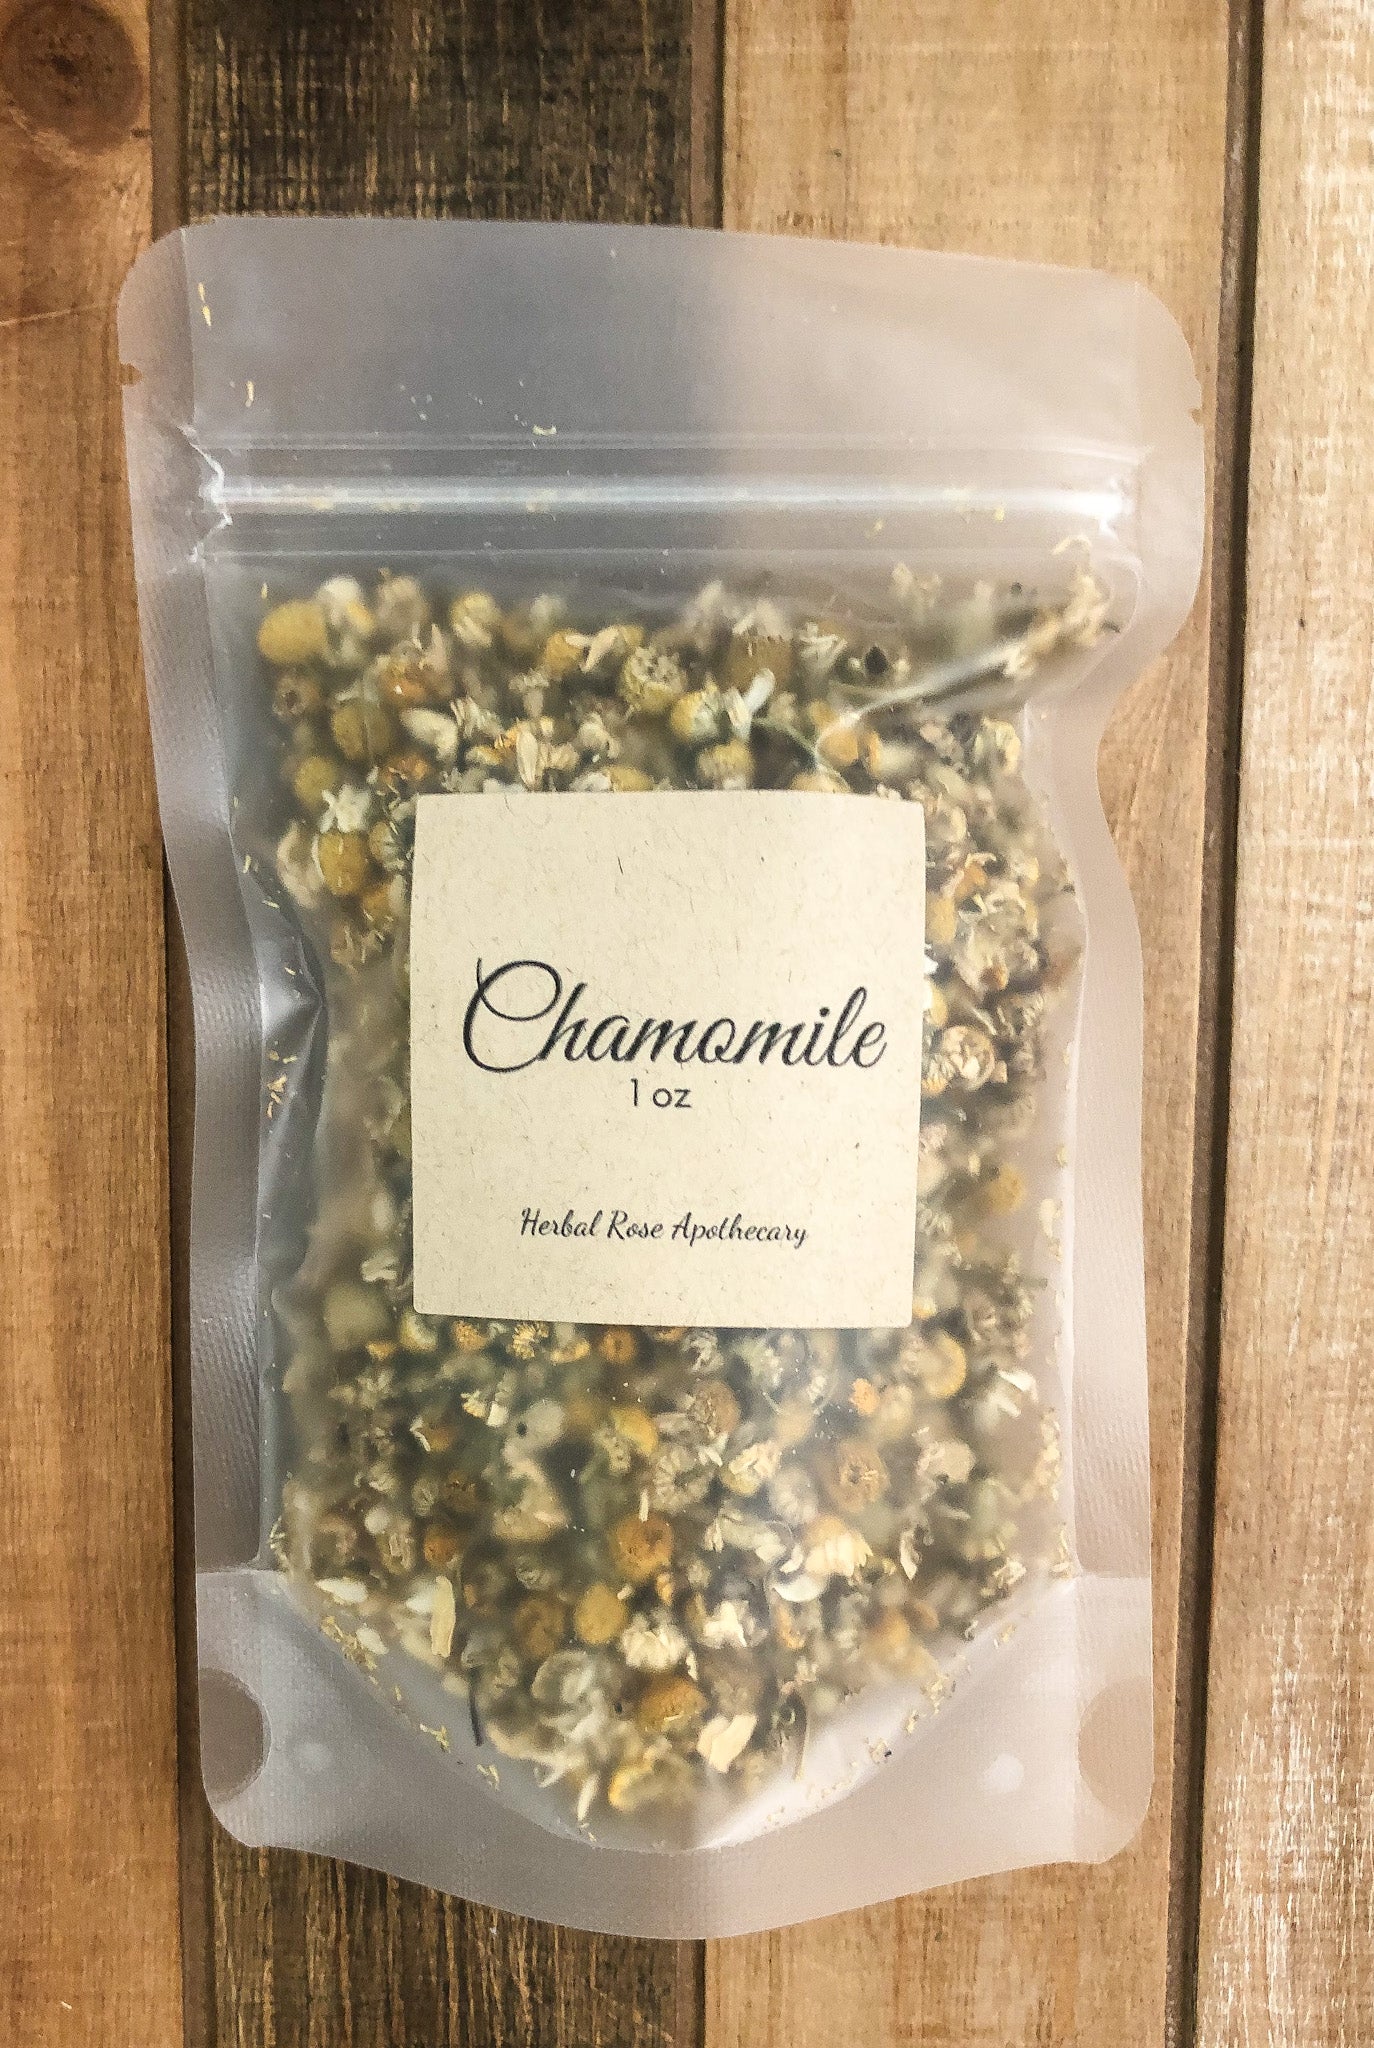 1oz dried chamomile in a clear plastic bag with a wooden background